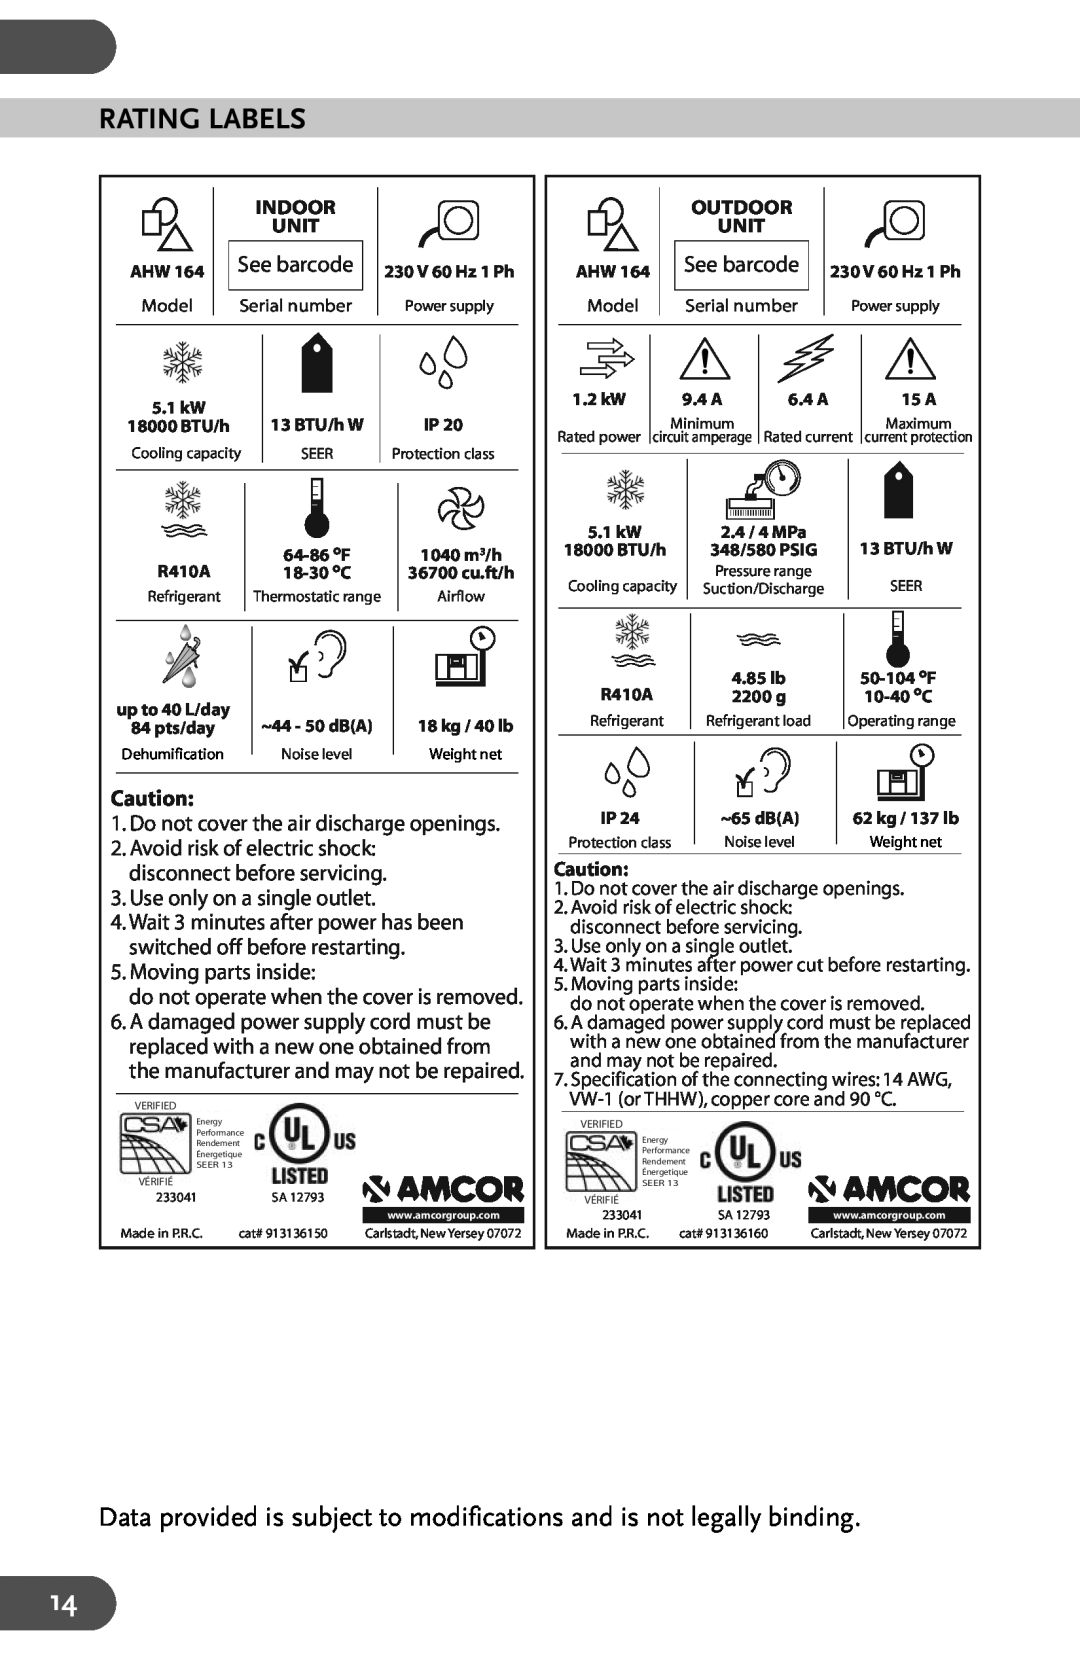 Amcor AHW 164 Rating Labels, Do not cover the air discharge openings, Use only on a single outlet, Moving parts inside 